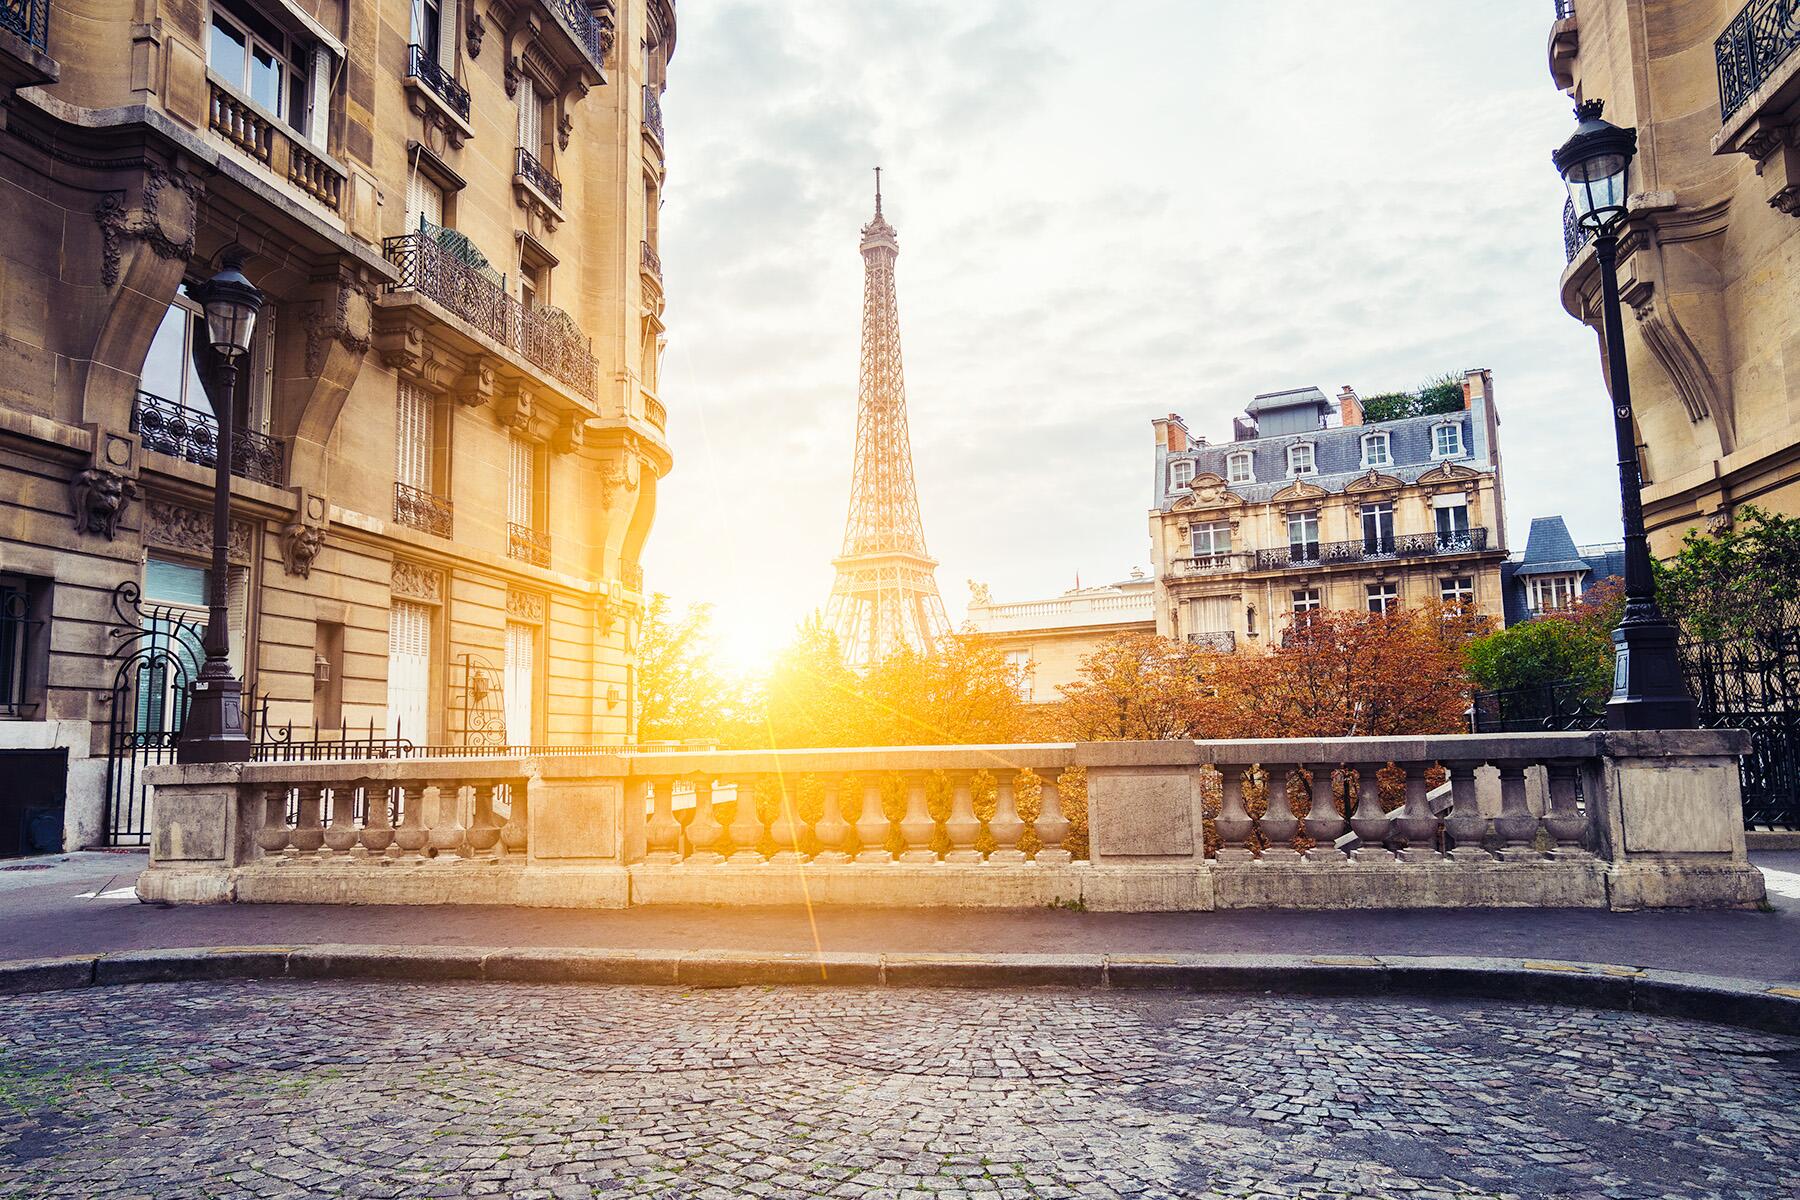 Where to Get the Best View of the Eiffel Tower - Midlife Globetrotter